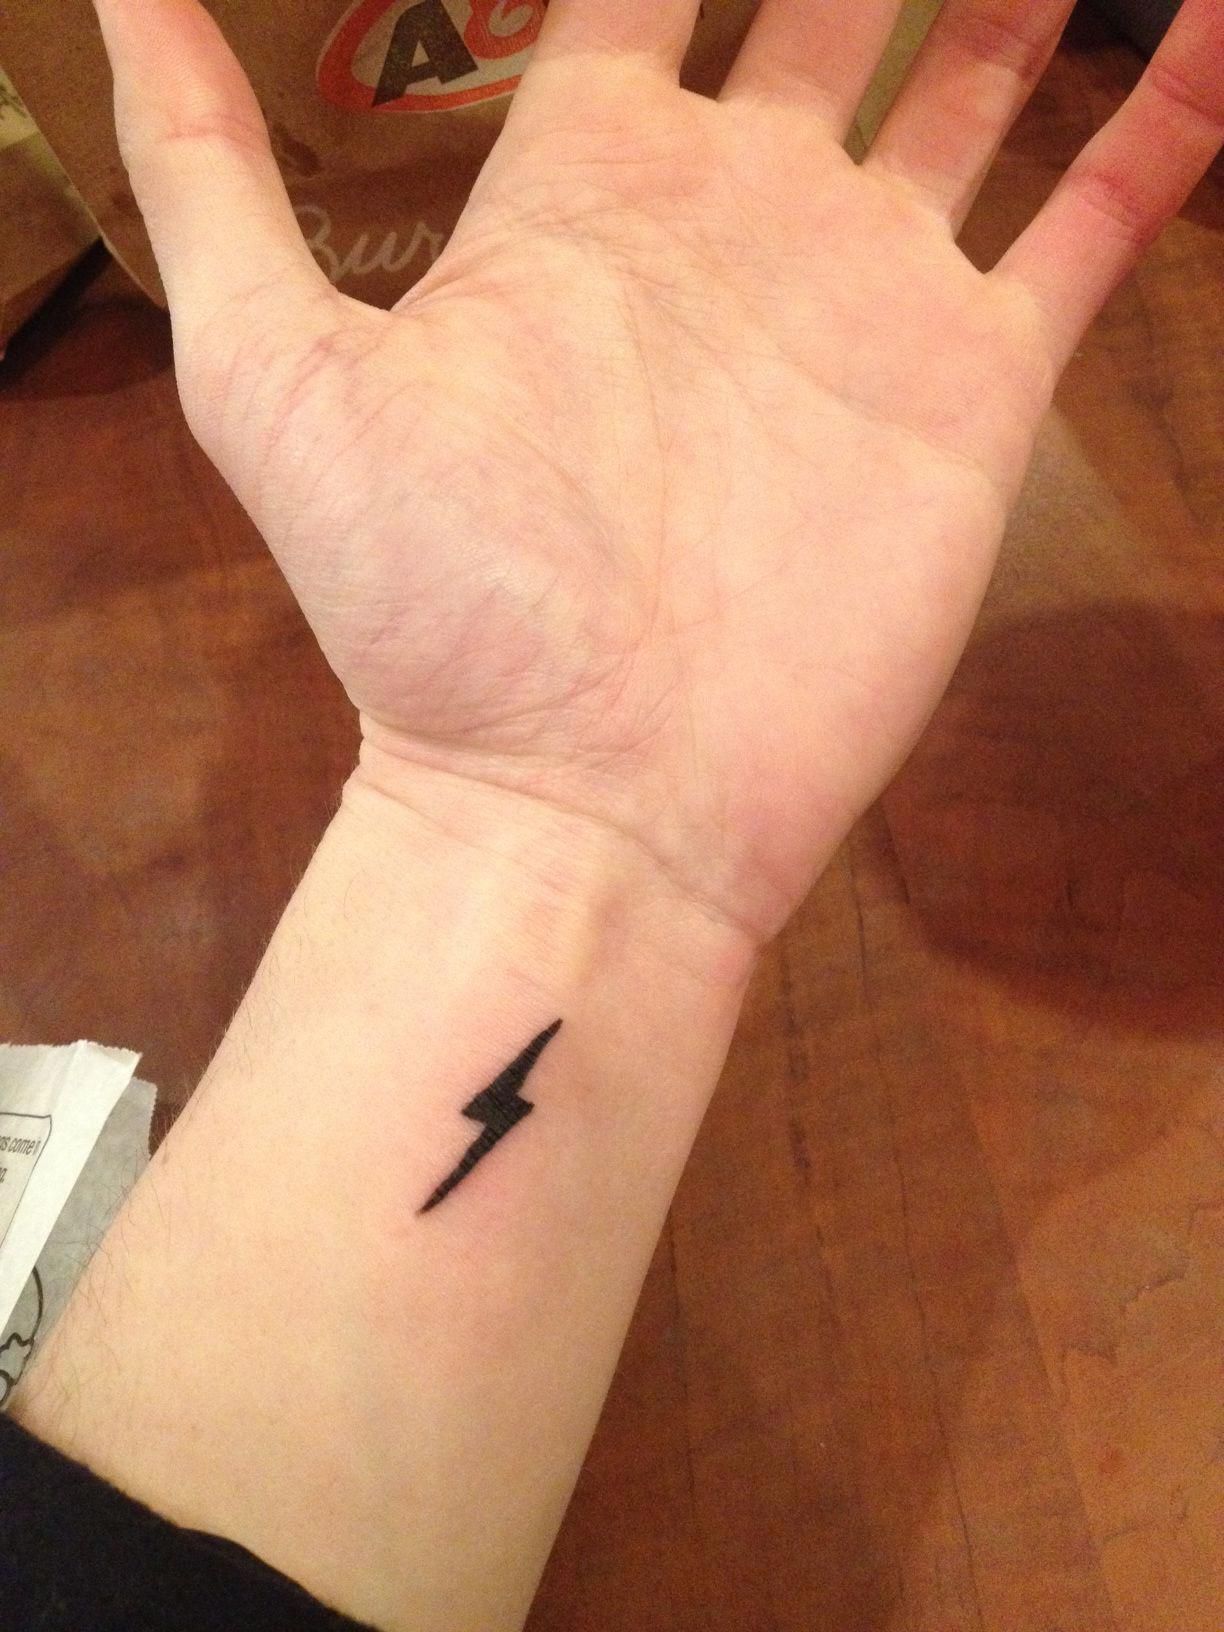 The Meaning of Double Lightning Bolt Tattoo A Powerful Symbol with Electrifying Significance